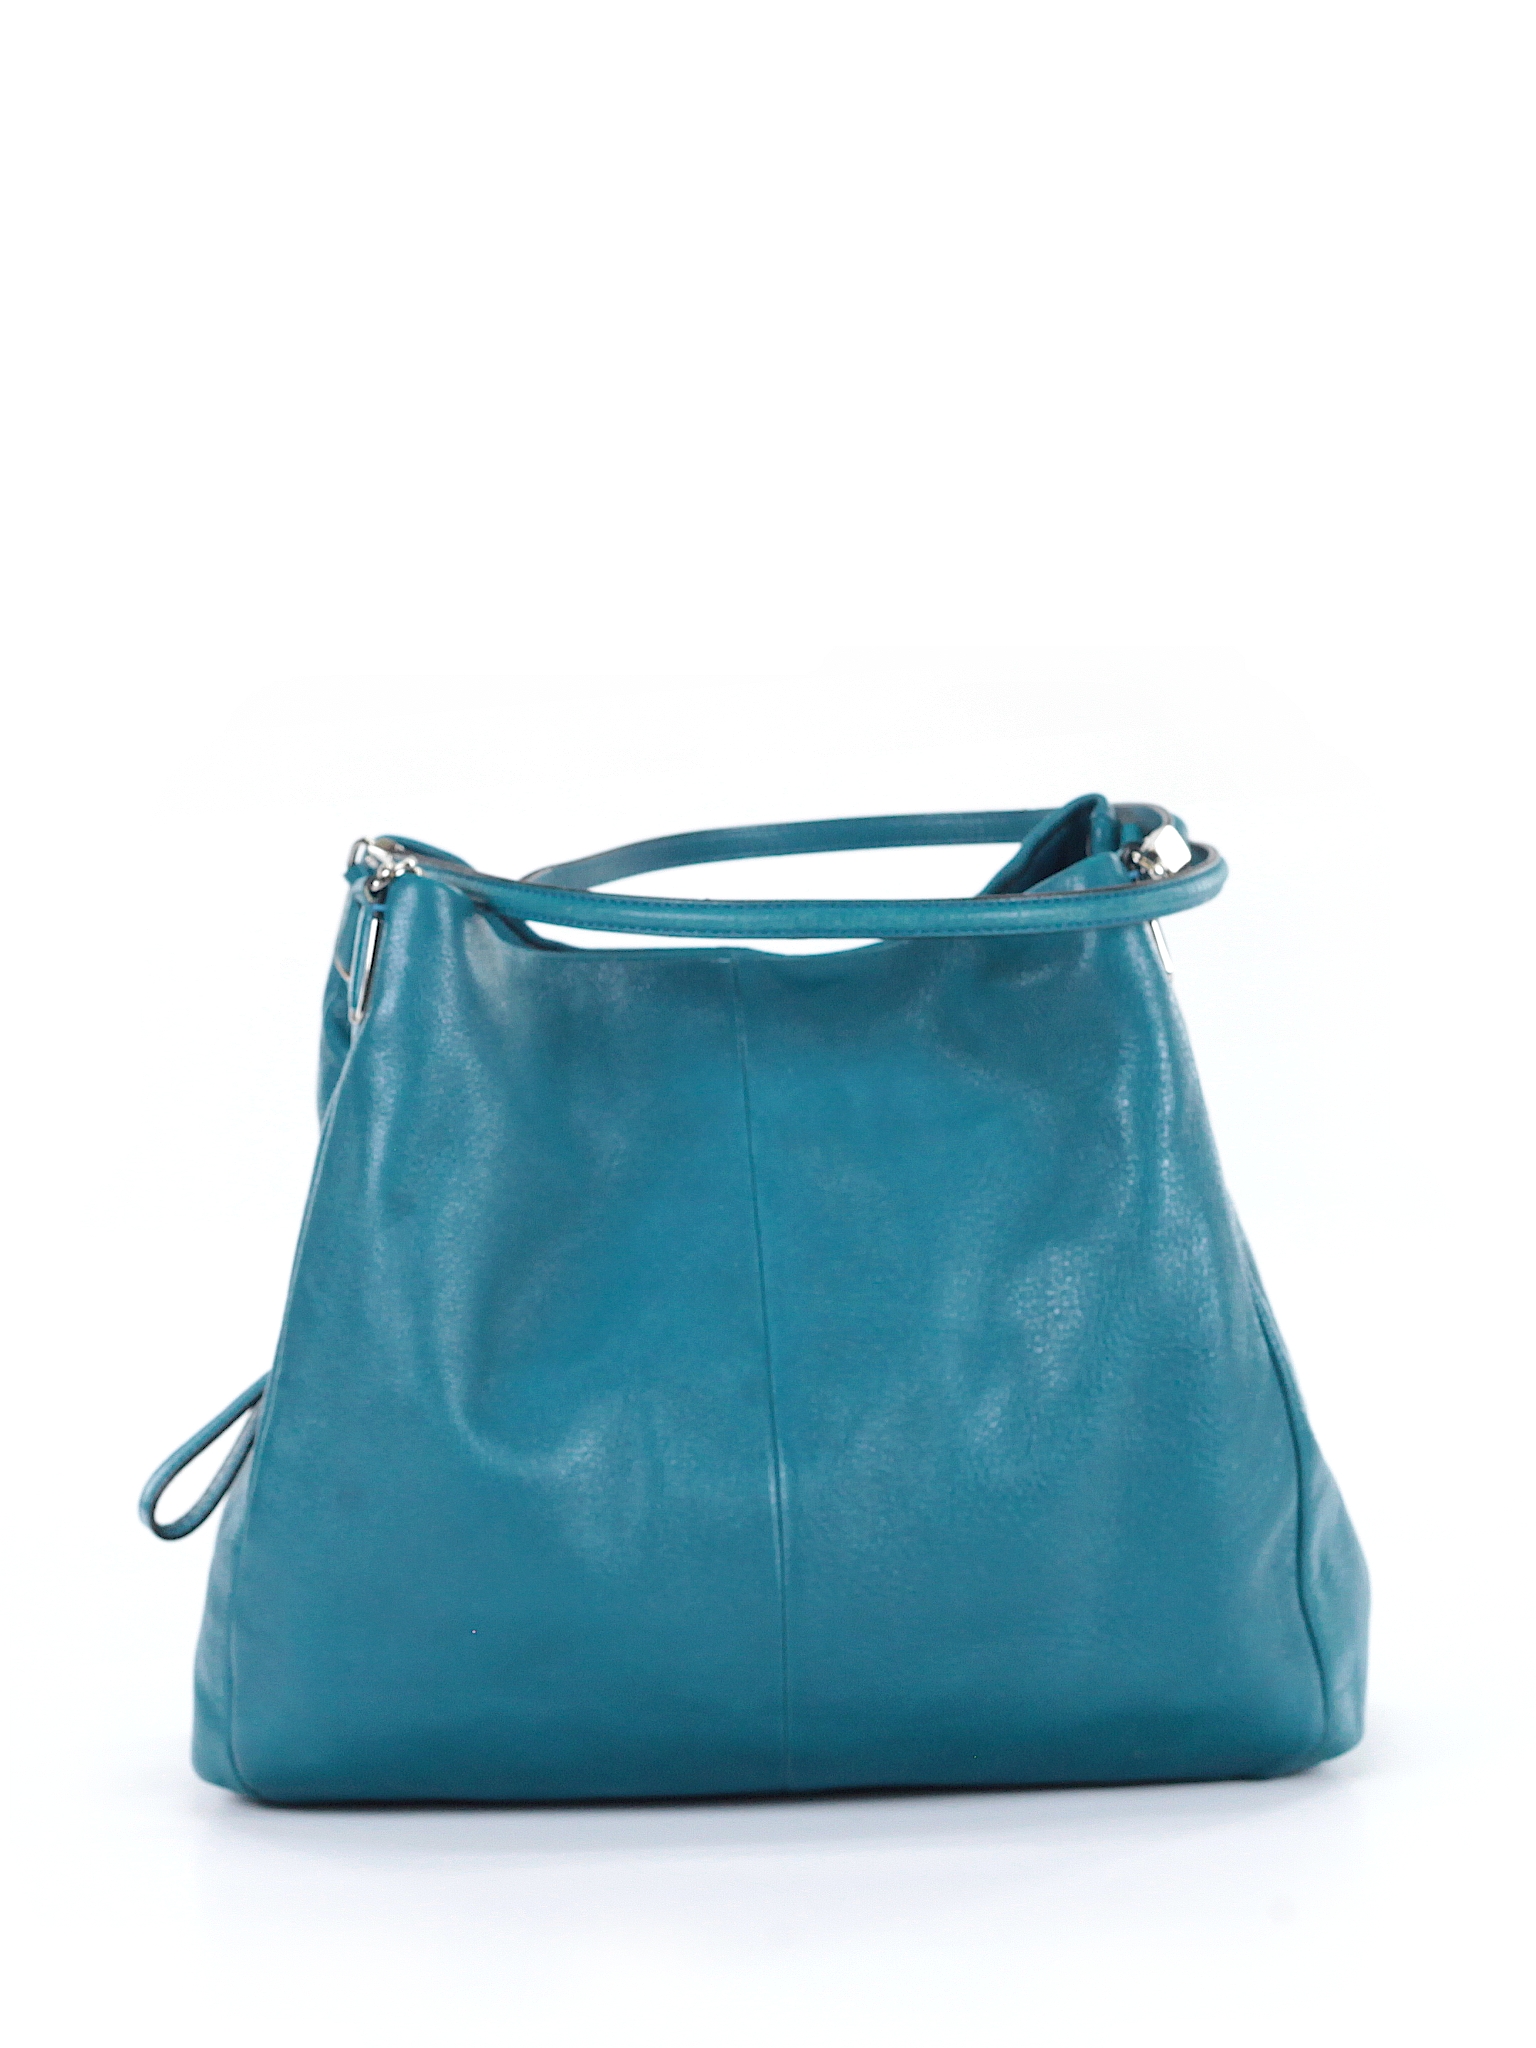 Coach 100% Leather Solid Teal Leather Tote One Size - 63% off | thredUP